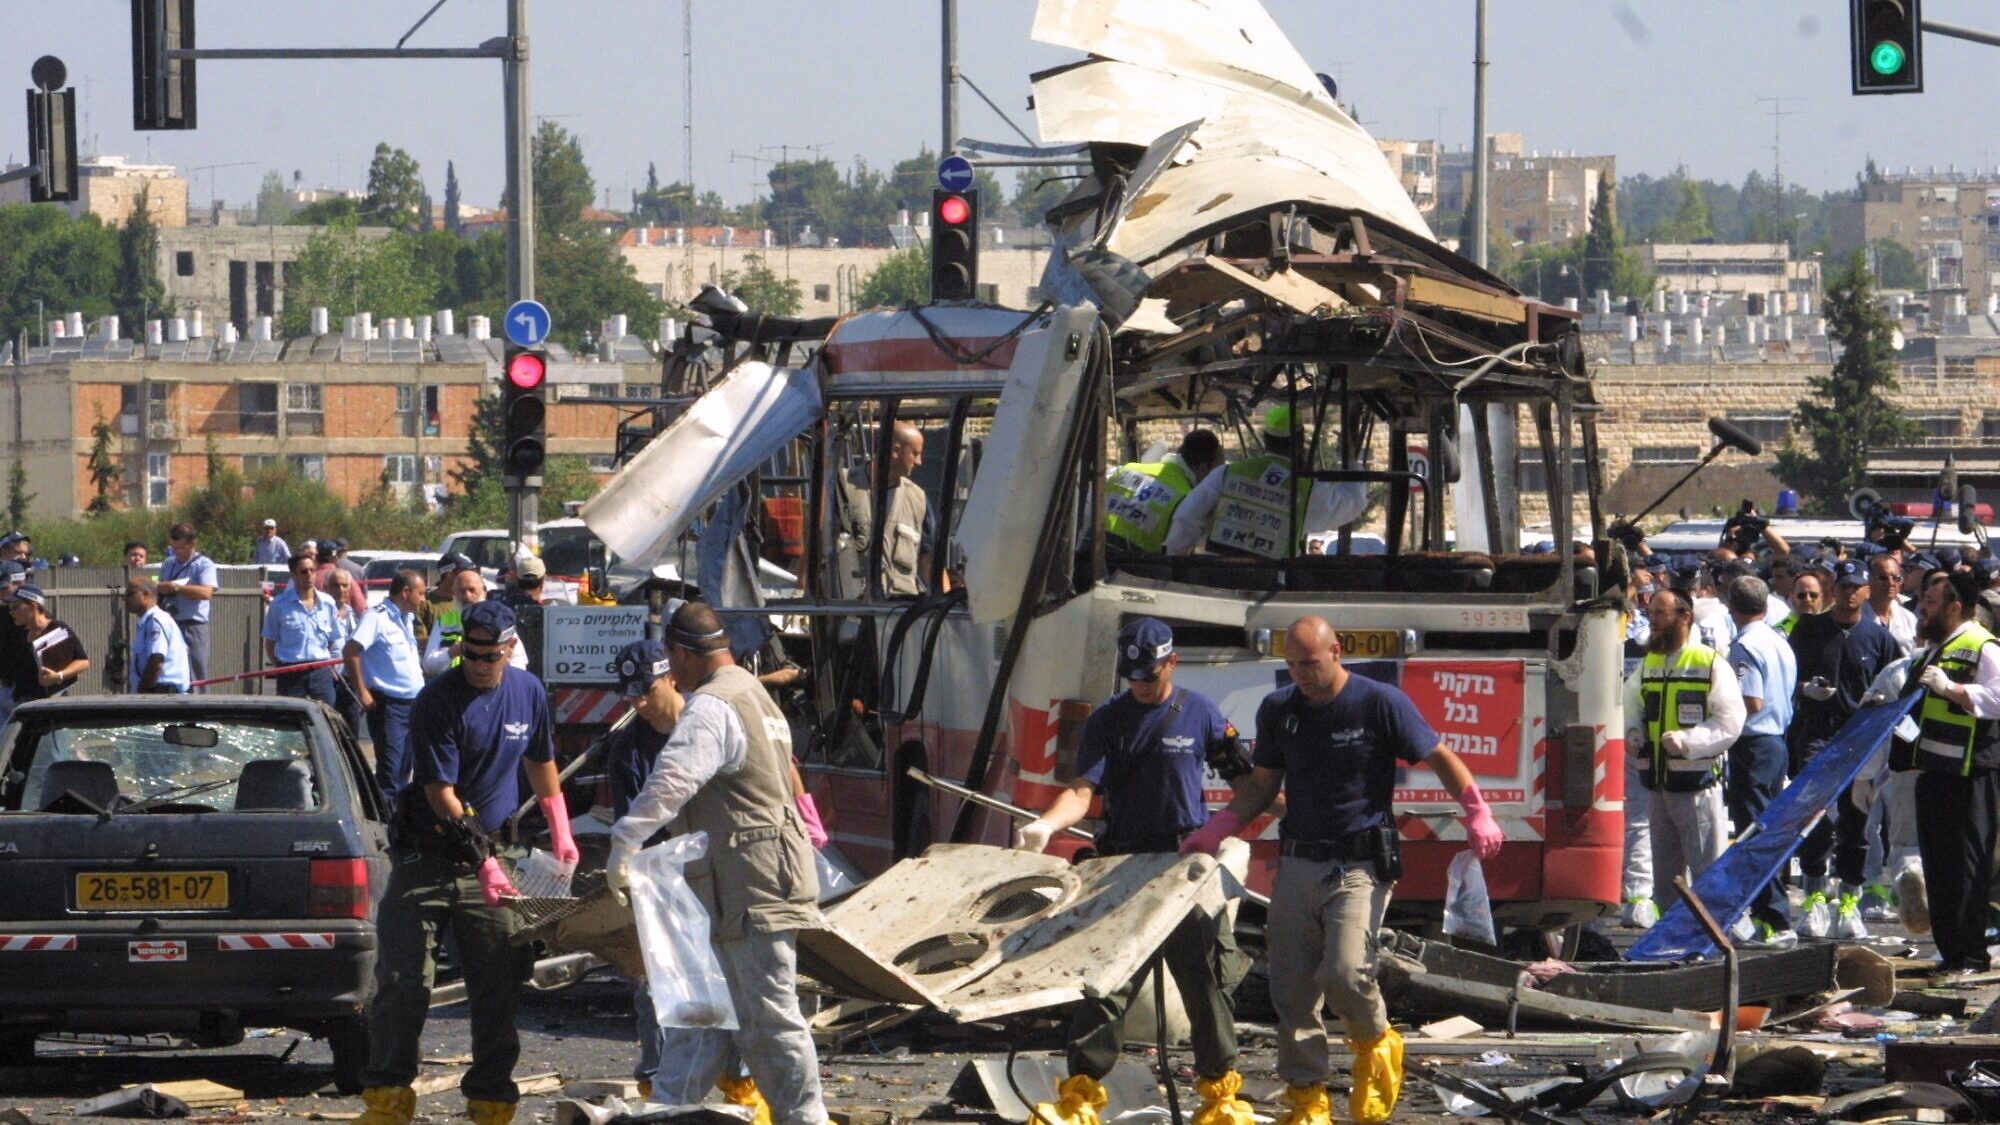 Paramedics and police at the scene of a suicide bombing that killed 19 and wounded 74 on a bus in Jerusalem. Hamas claimed responsibility for the attack, June 18, 2002. Photo by Flash90.